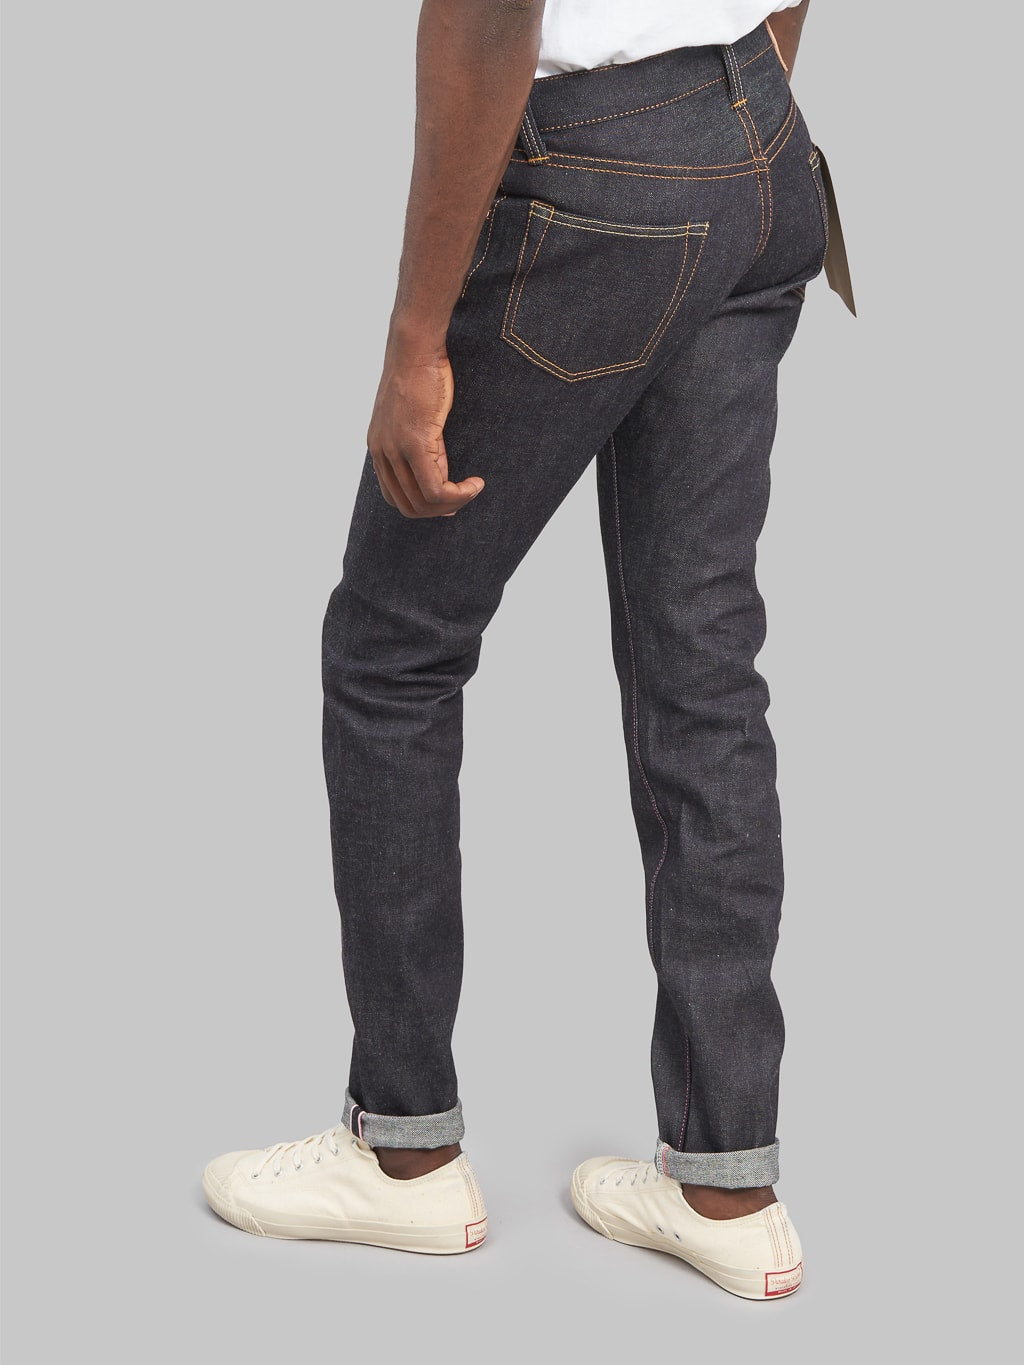 Momotaro 0405 12oz high Tapered Jeans  style